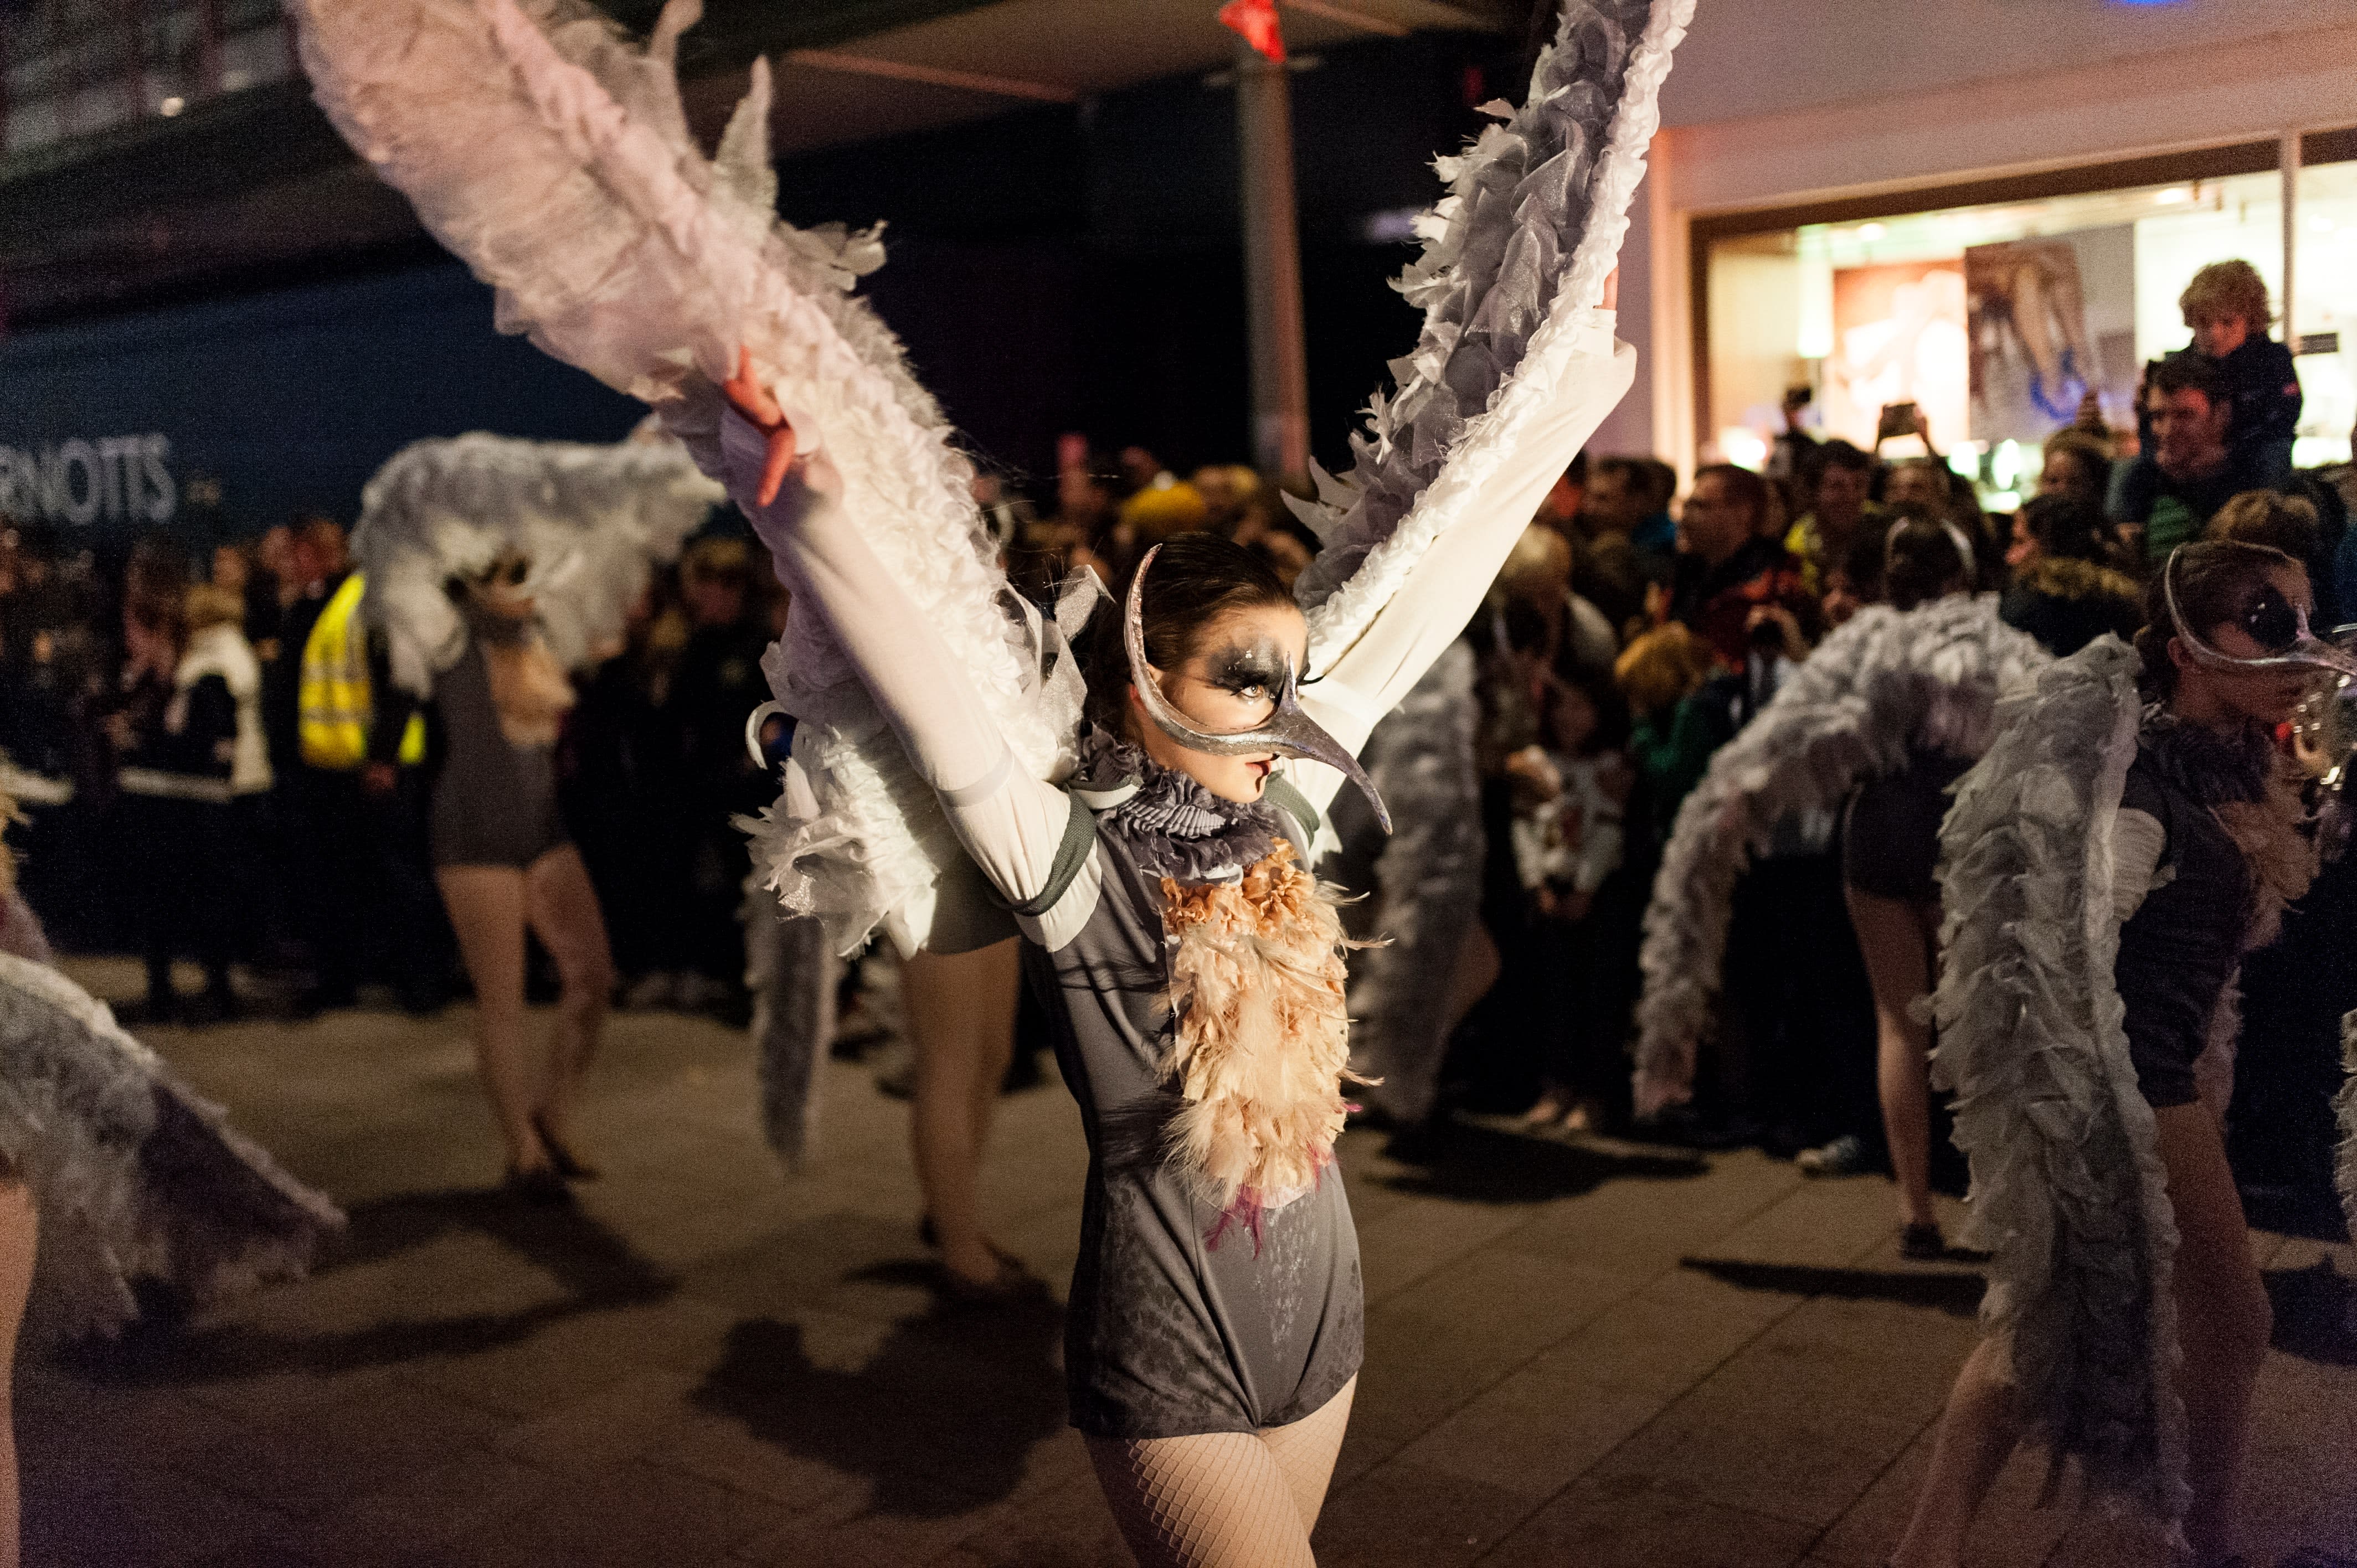 Image of Costume, Person, Adult, Female, Woman, Carnival, Bride, People, Urban, 